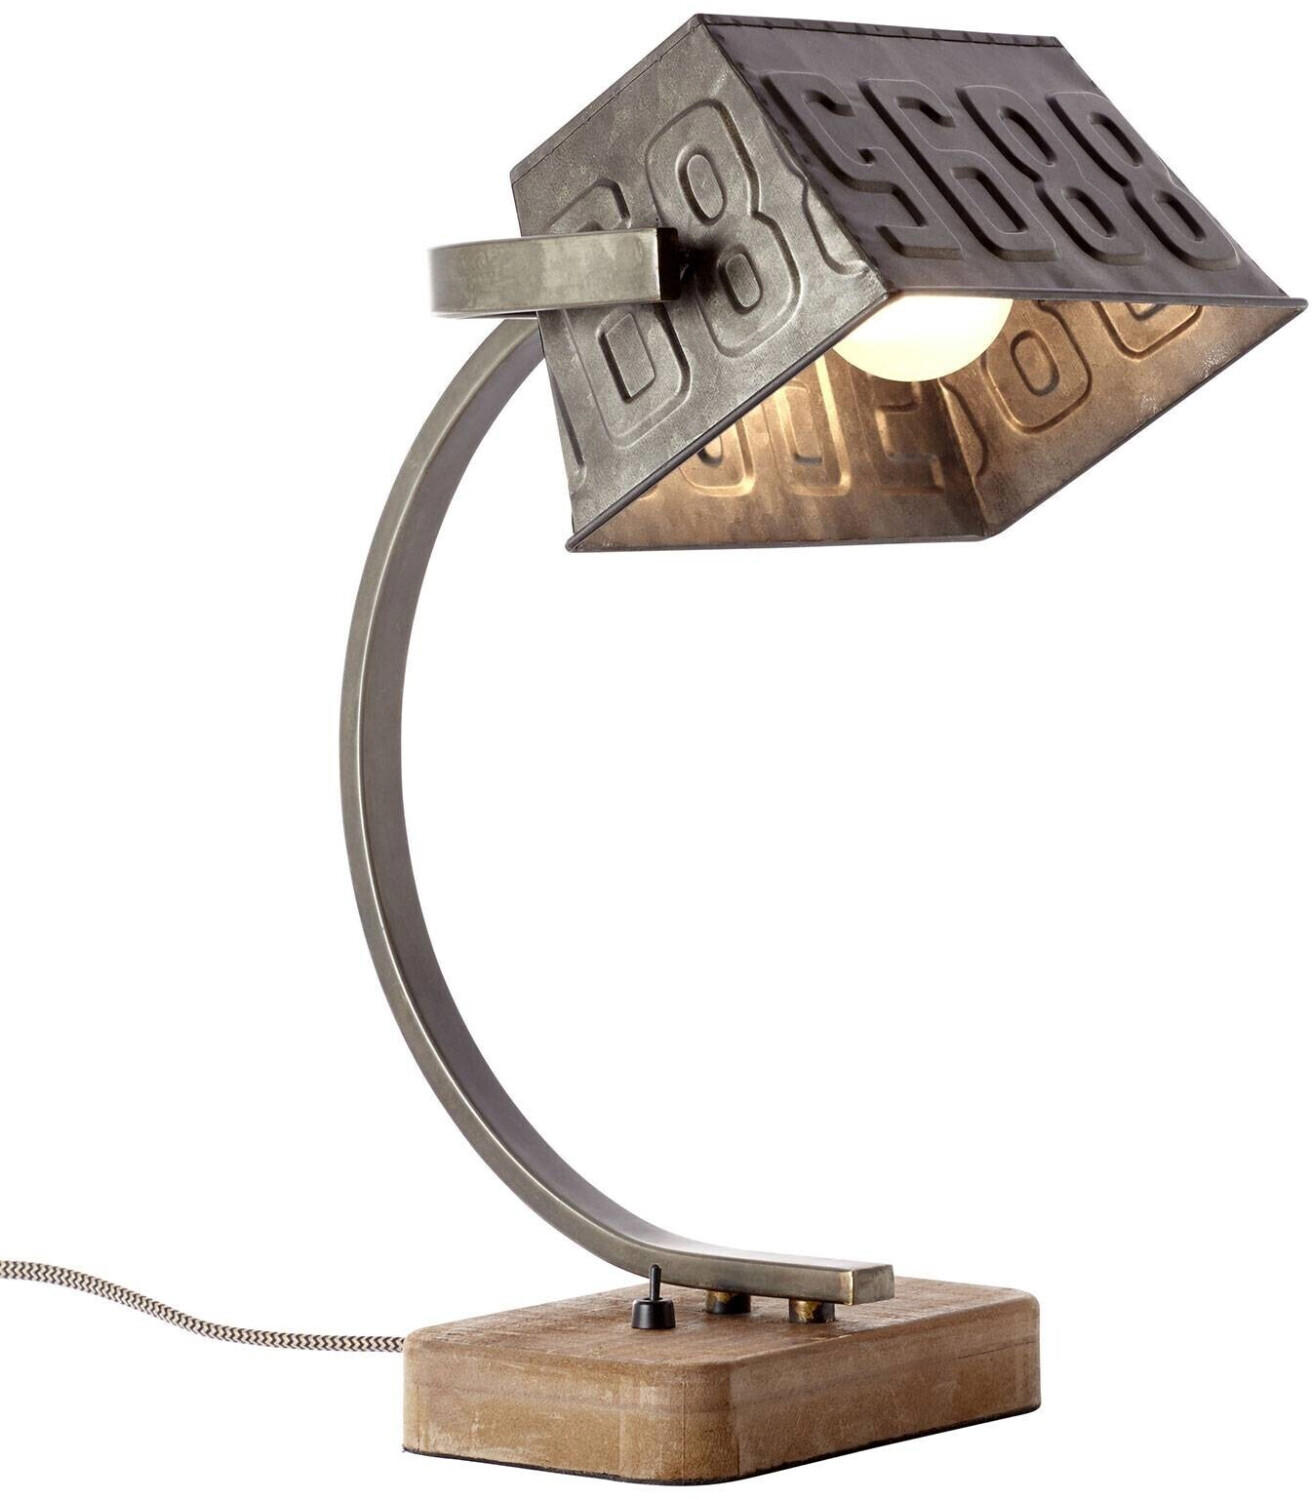 Brilliant Drake metal table lamp with wooden base